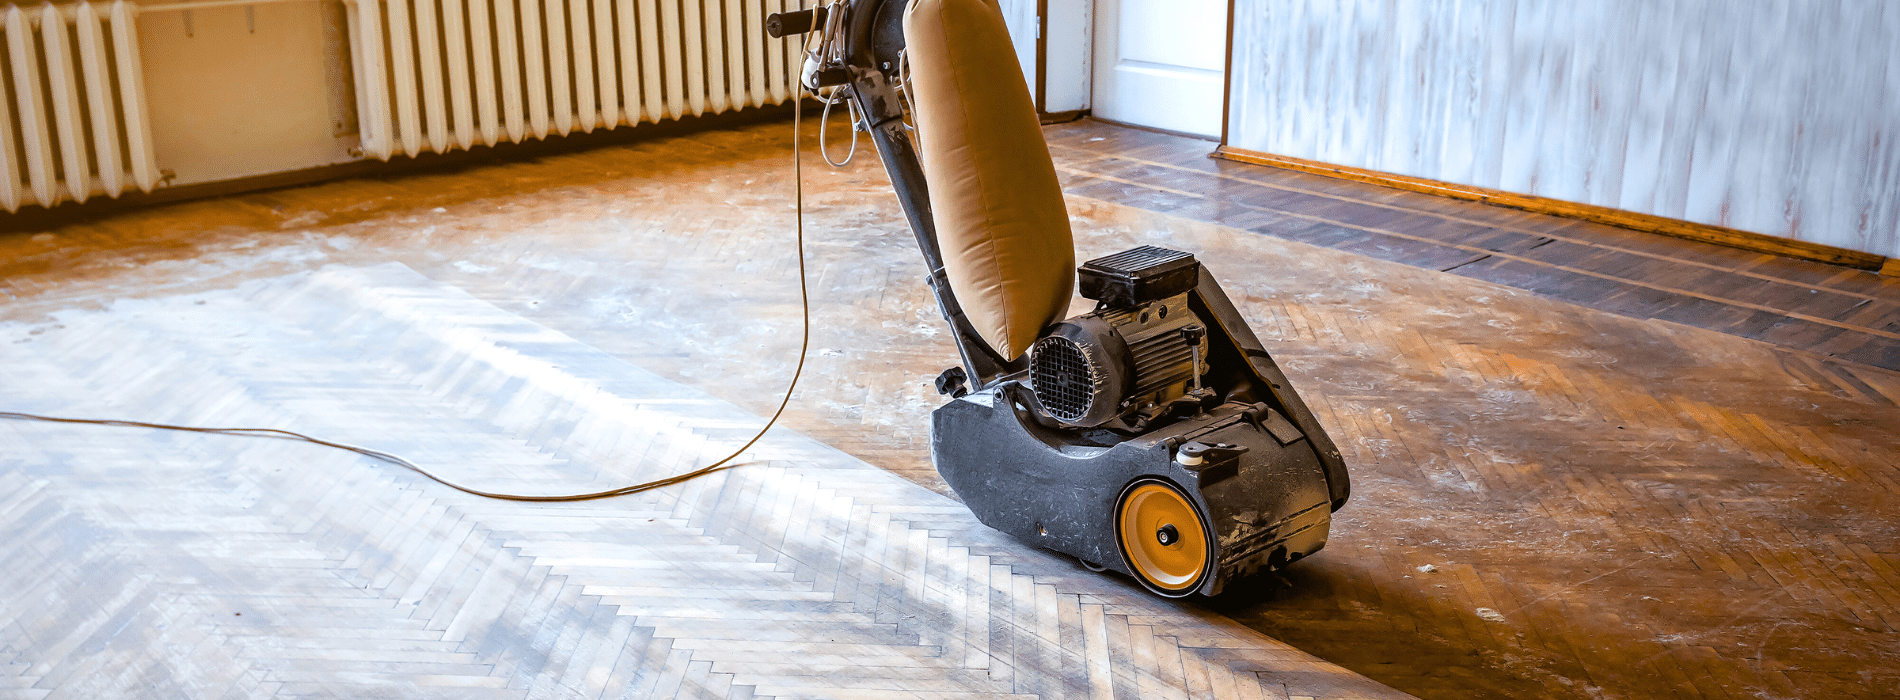 In Dagenham, RM10, Mr Sander® use a Bona Scorpion drum sander (200 mm, 1.5 kW) connected to a HEPA-filtered dust extraction system. This ensures clean and efficient sanding of herringbone floors.

